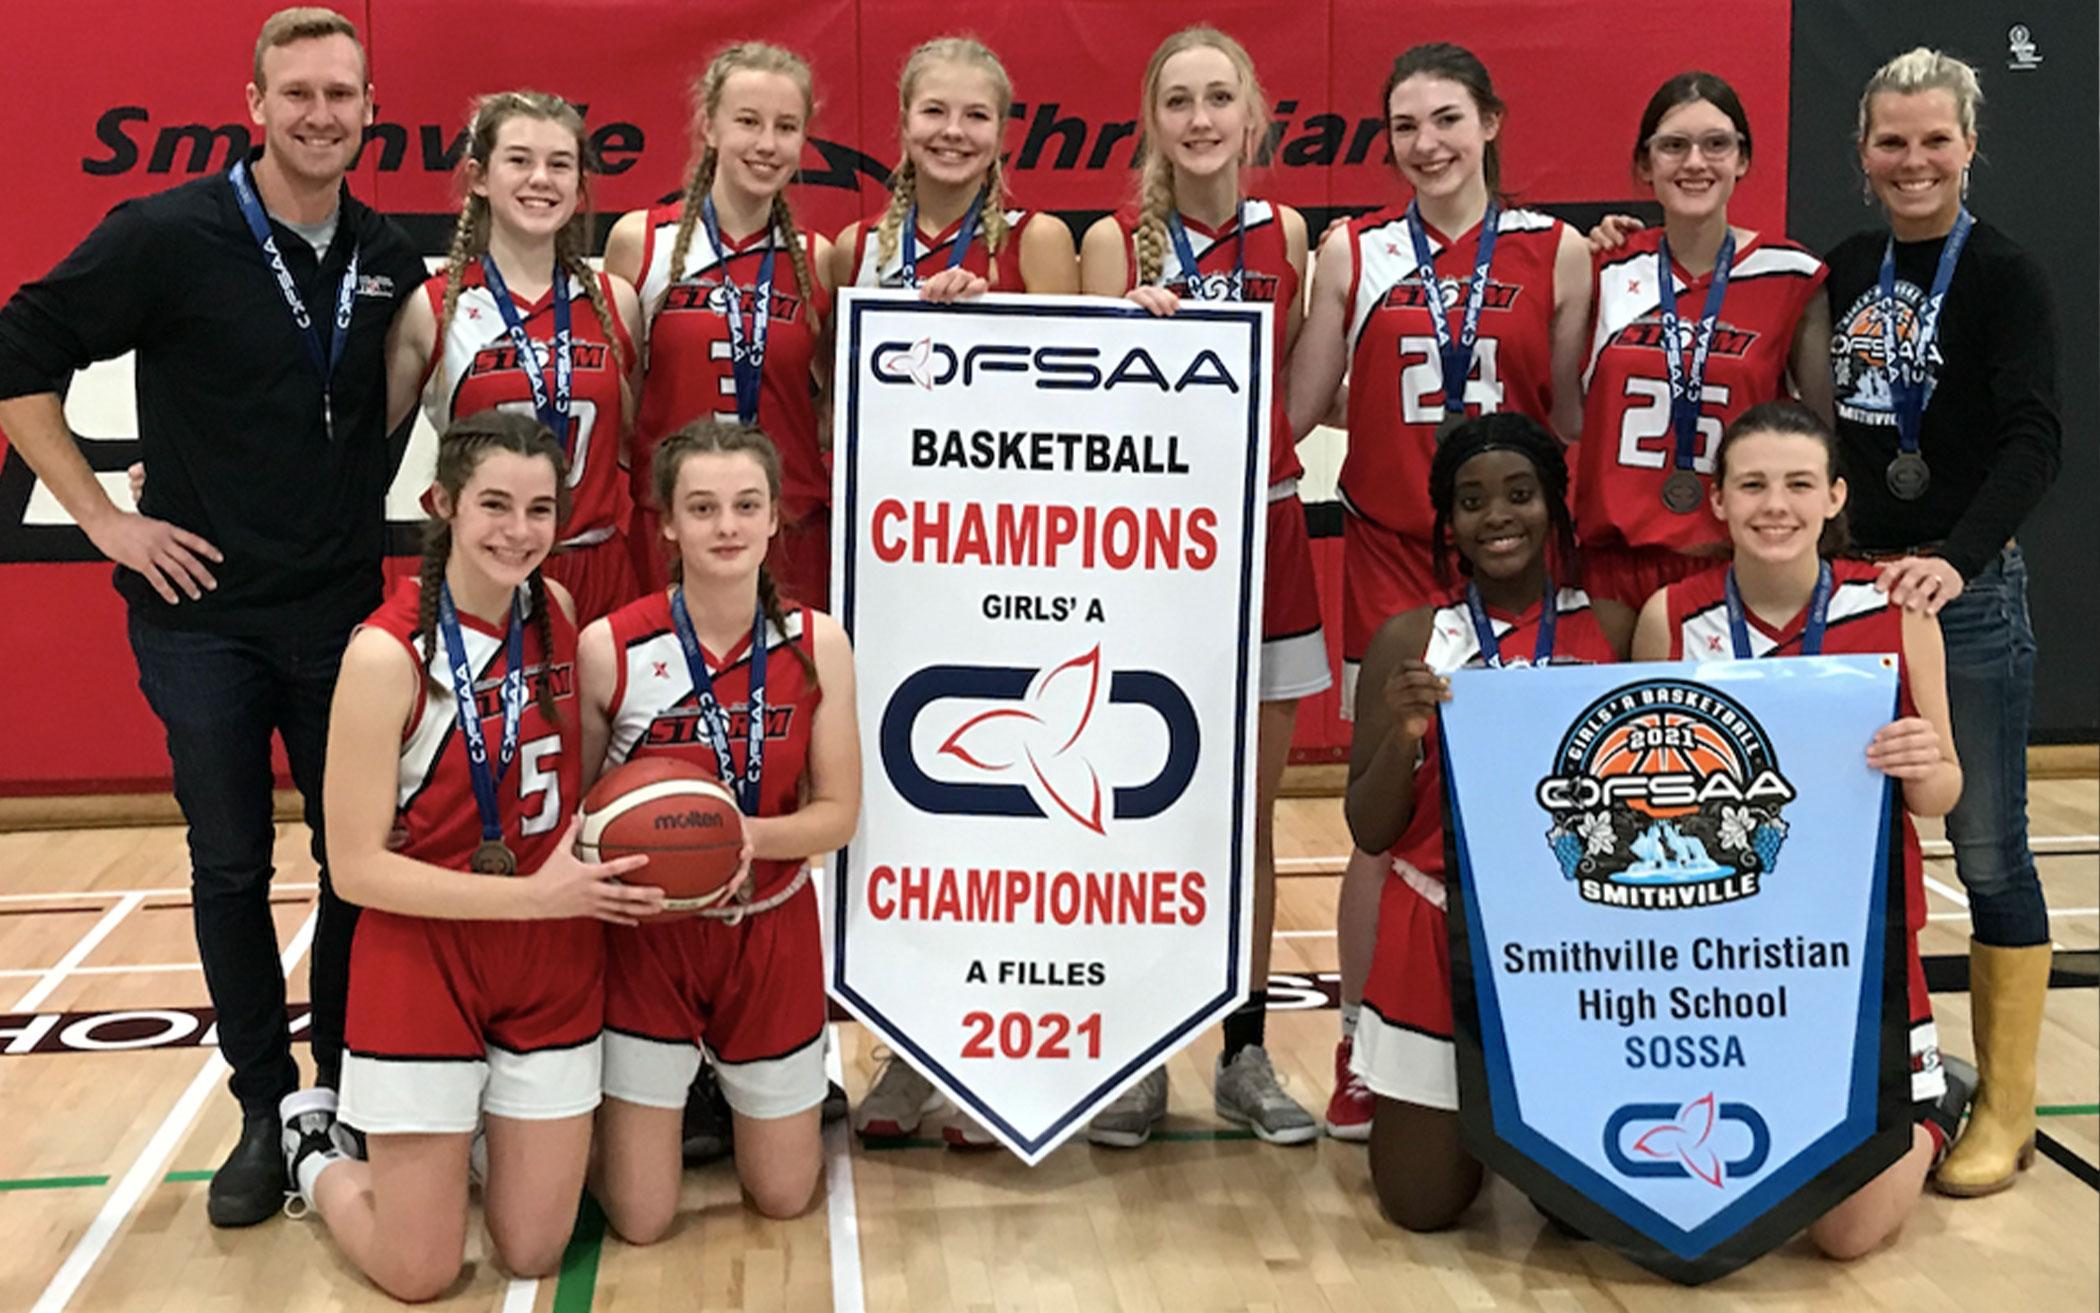 Smithville Christian High School girls’ basketball team after their November 27 victory. (Photo courtesy OFSAA.)